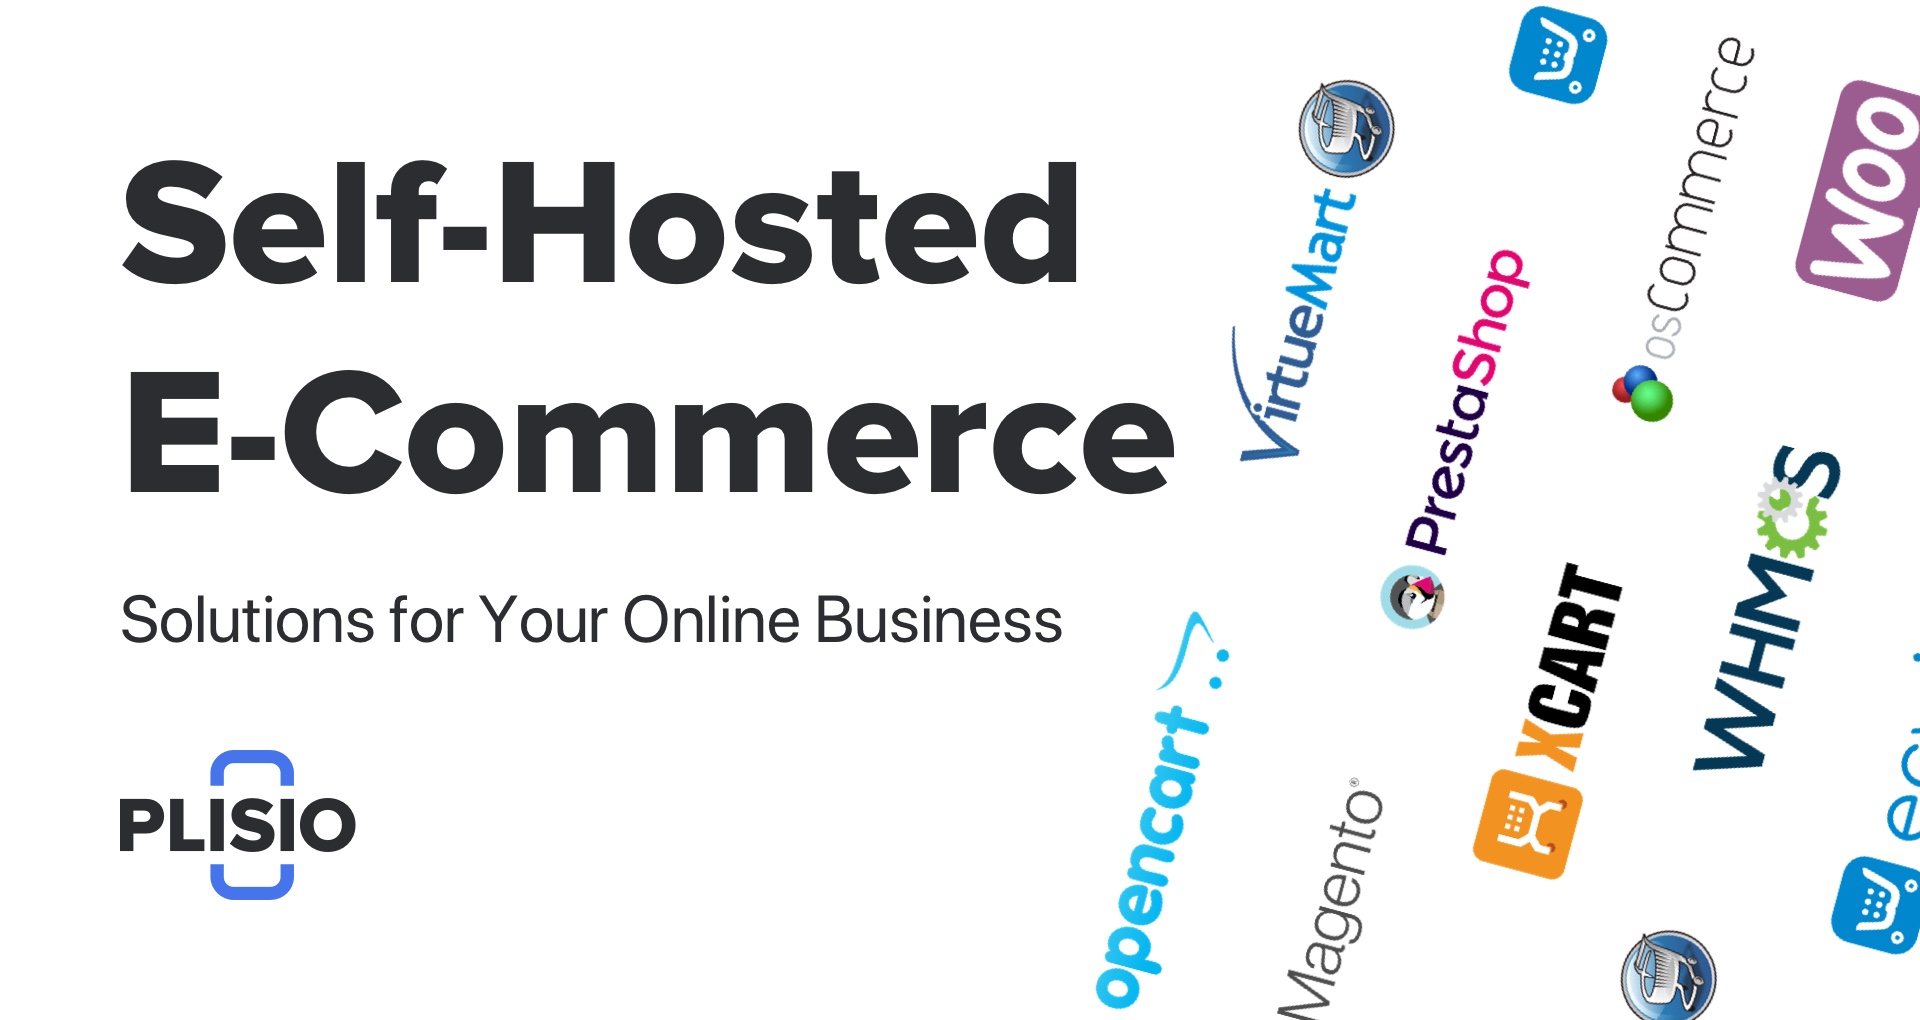 Best Self-Hosted E-Commerce Solutions for Your Online Business